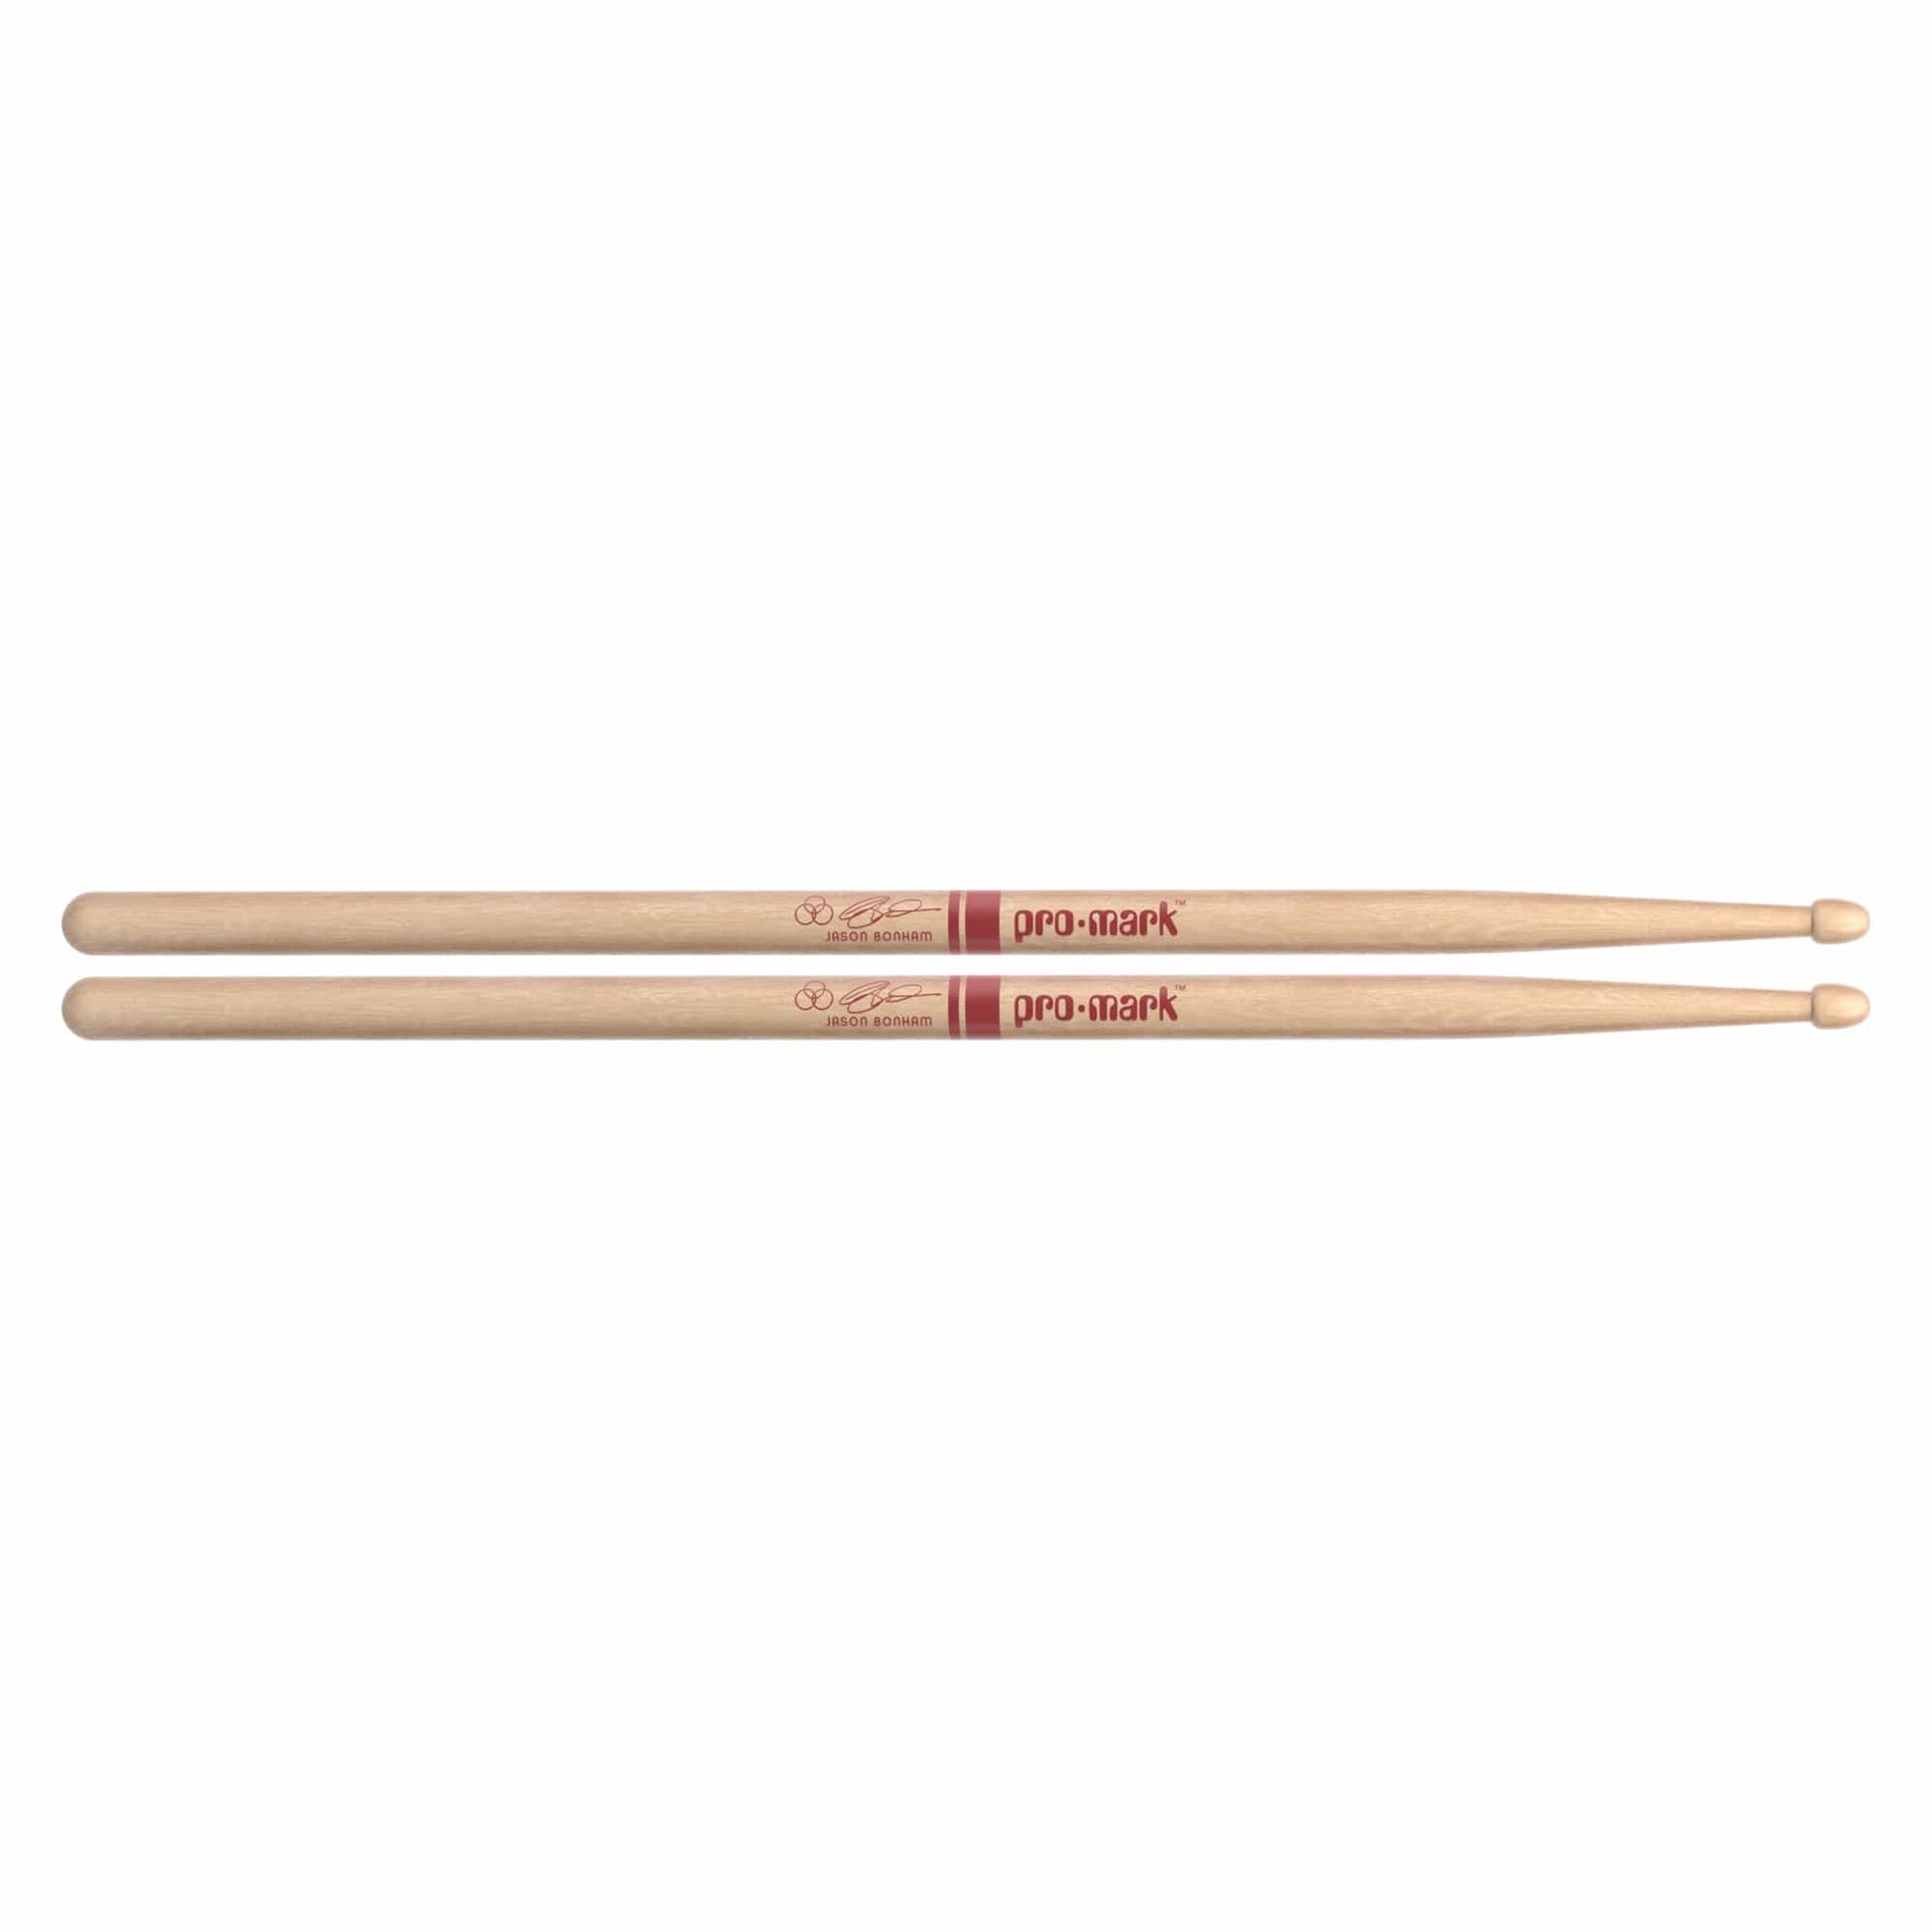 Promark Maple 531 Jason Bonham Wood Tip Drum Sticks Drums and Percussion / Parts and Accessories / Drum Sticks and Mallets